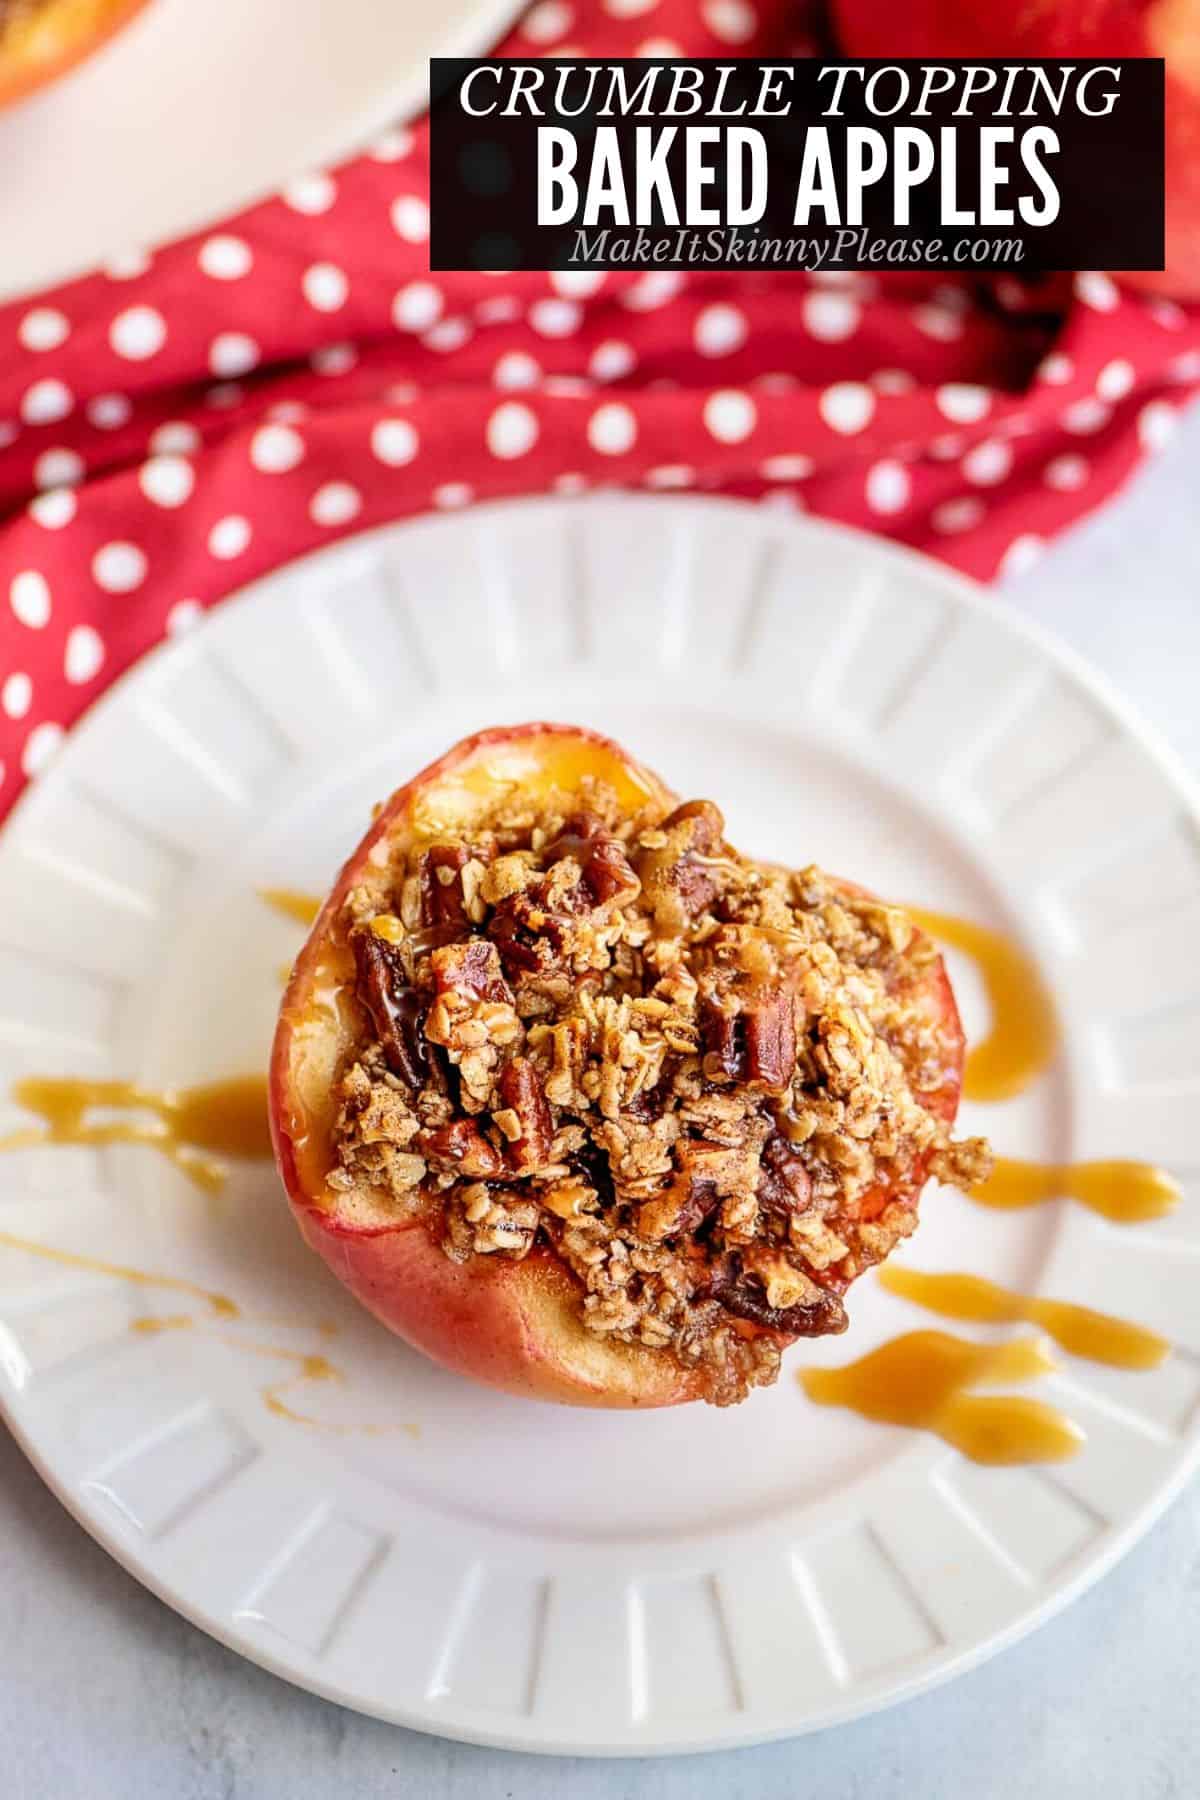 baked apple with sweet crumble topping on plate.